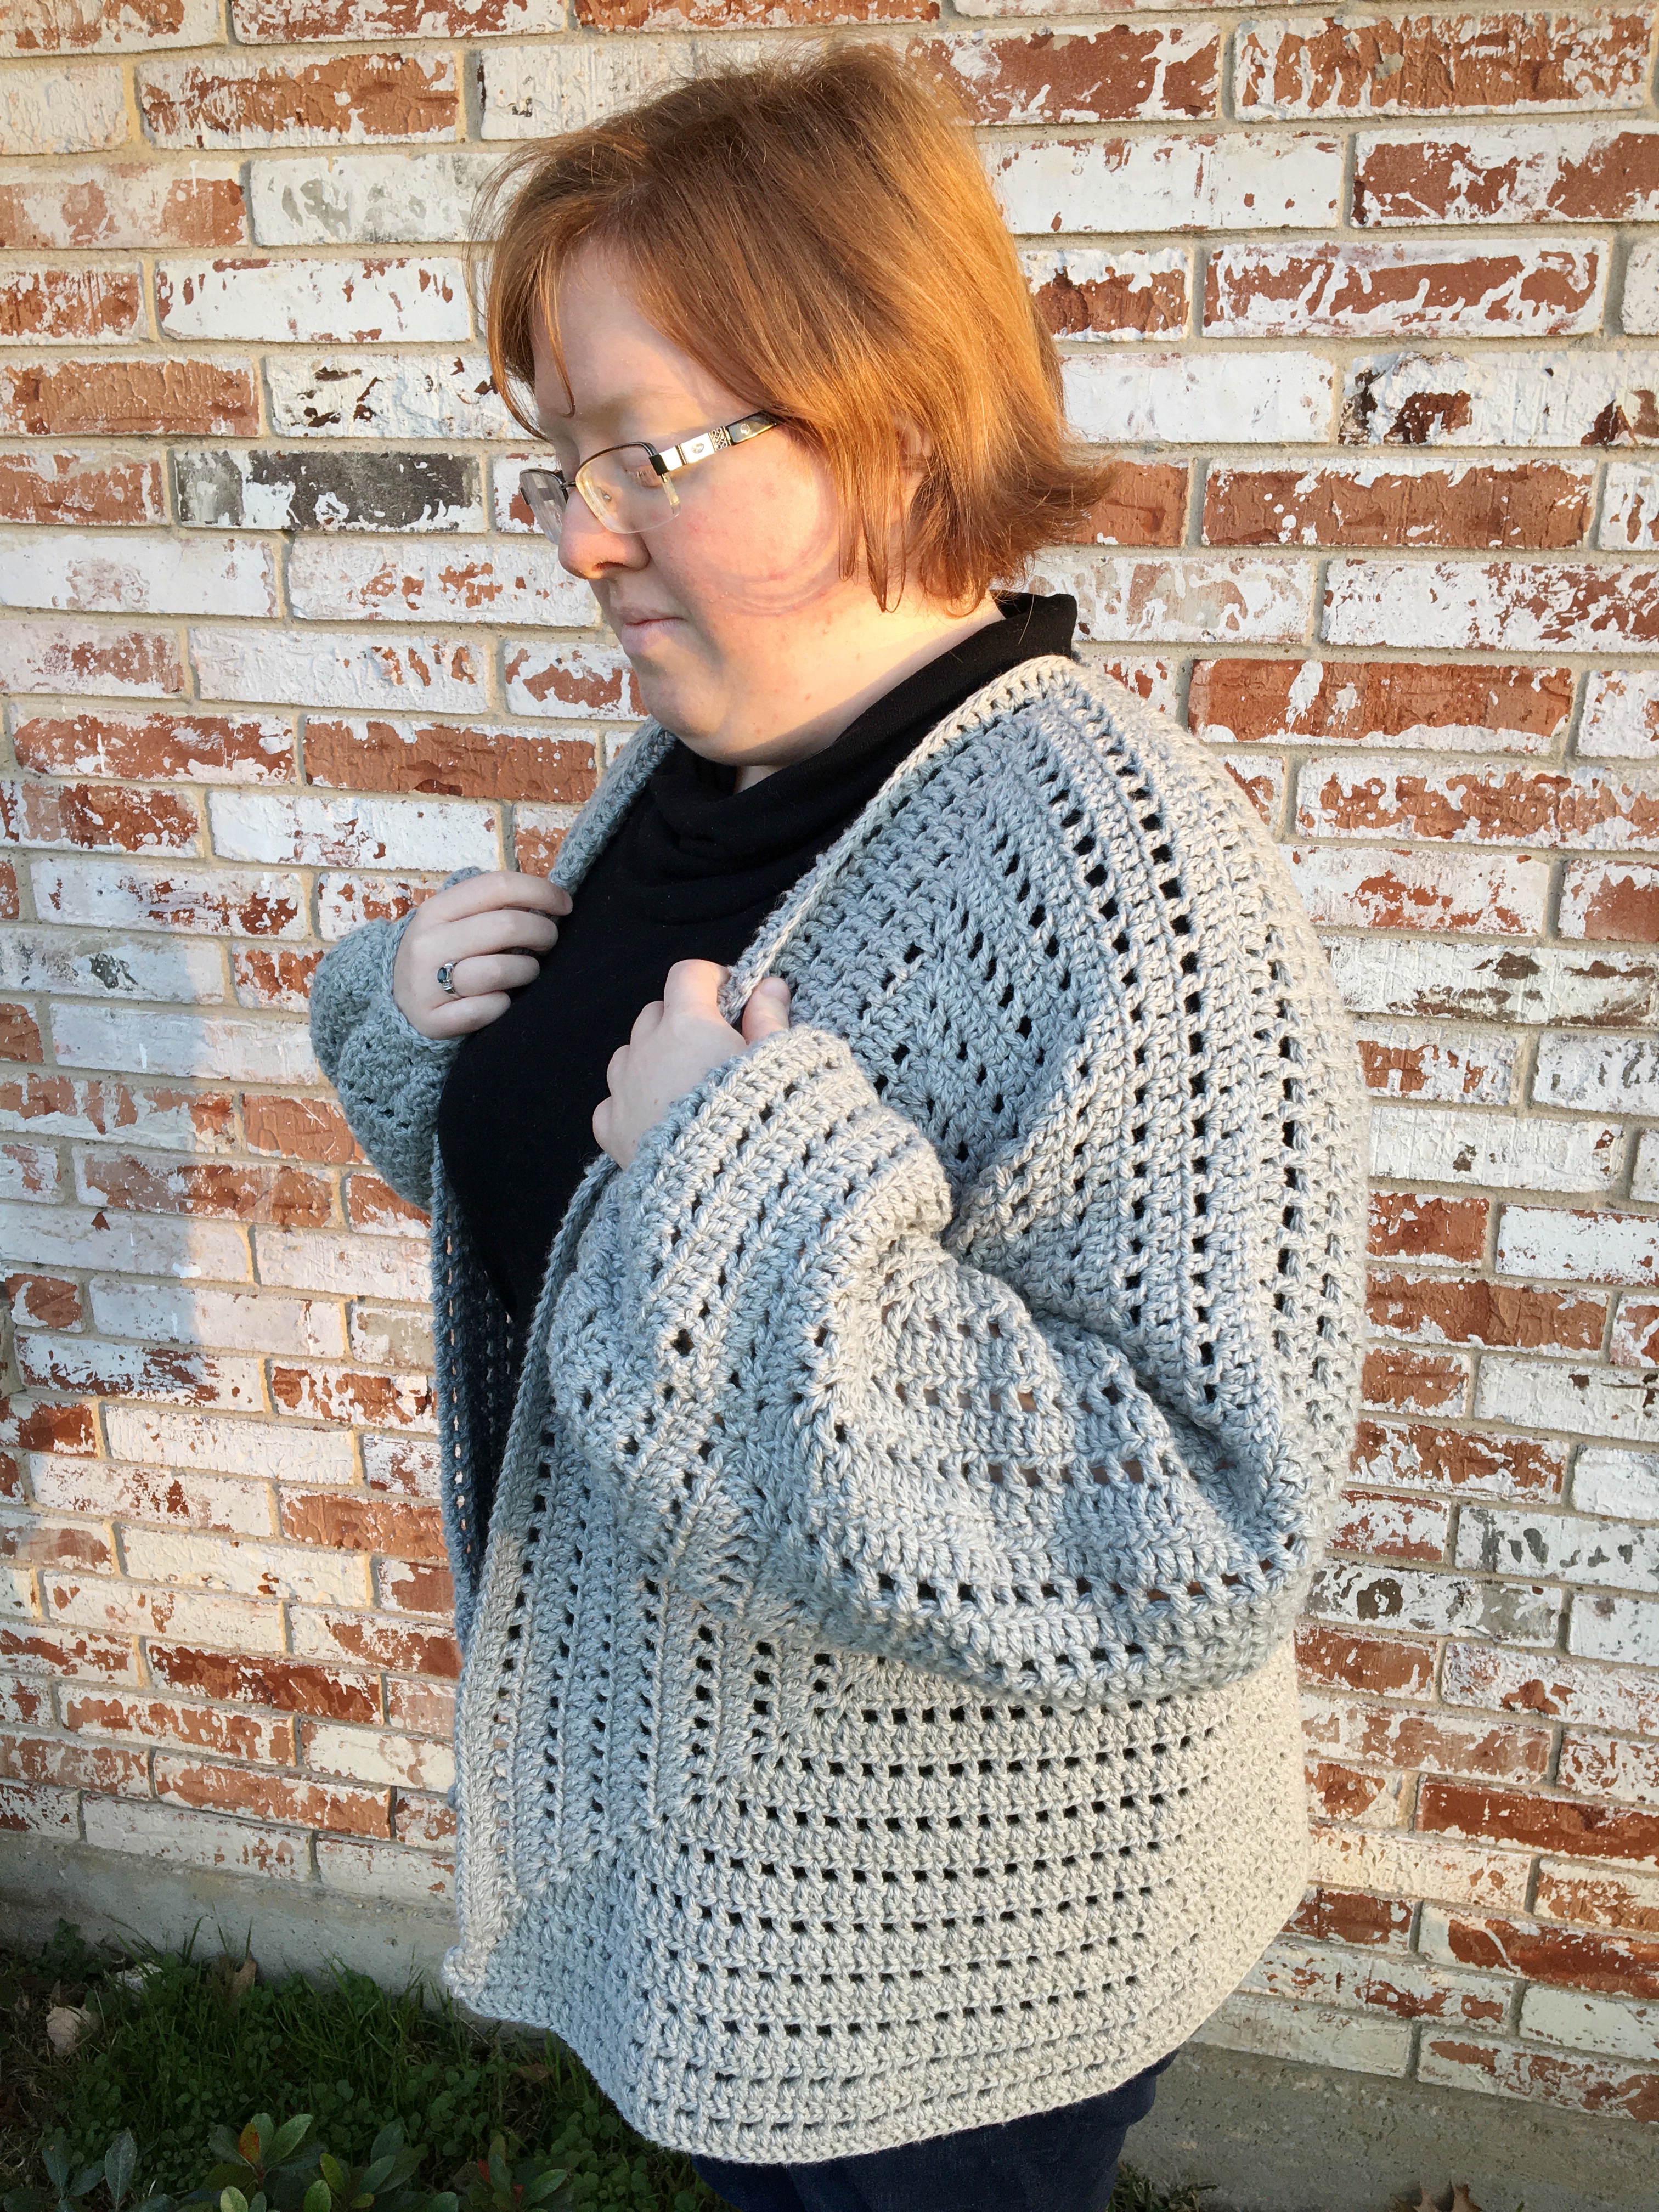 grey crocheted cardigan worn by a red haired woman